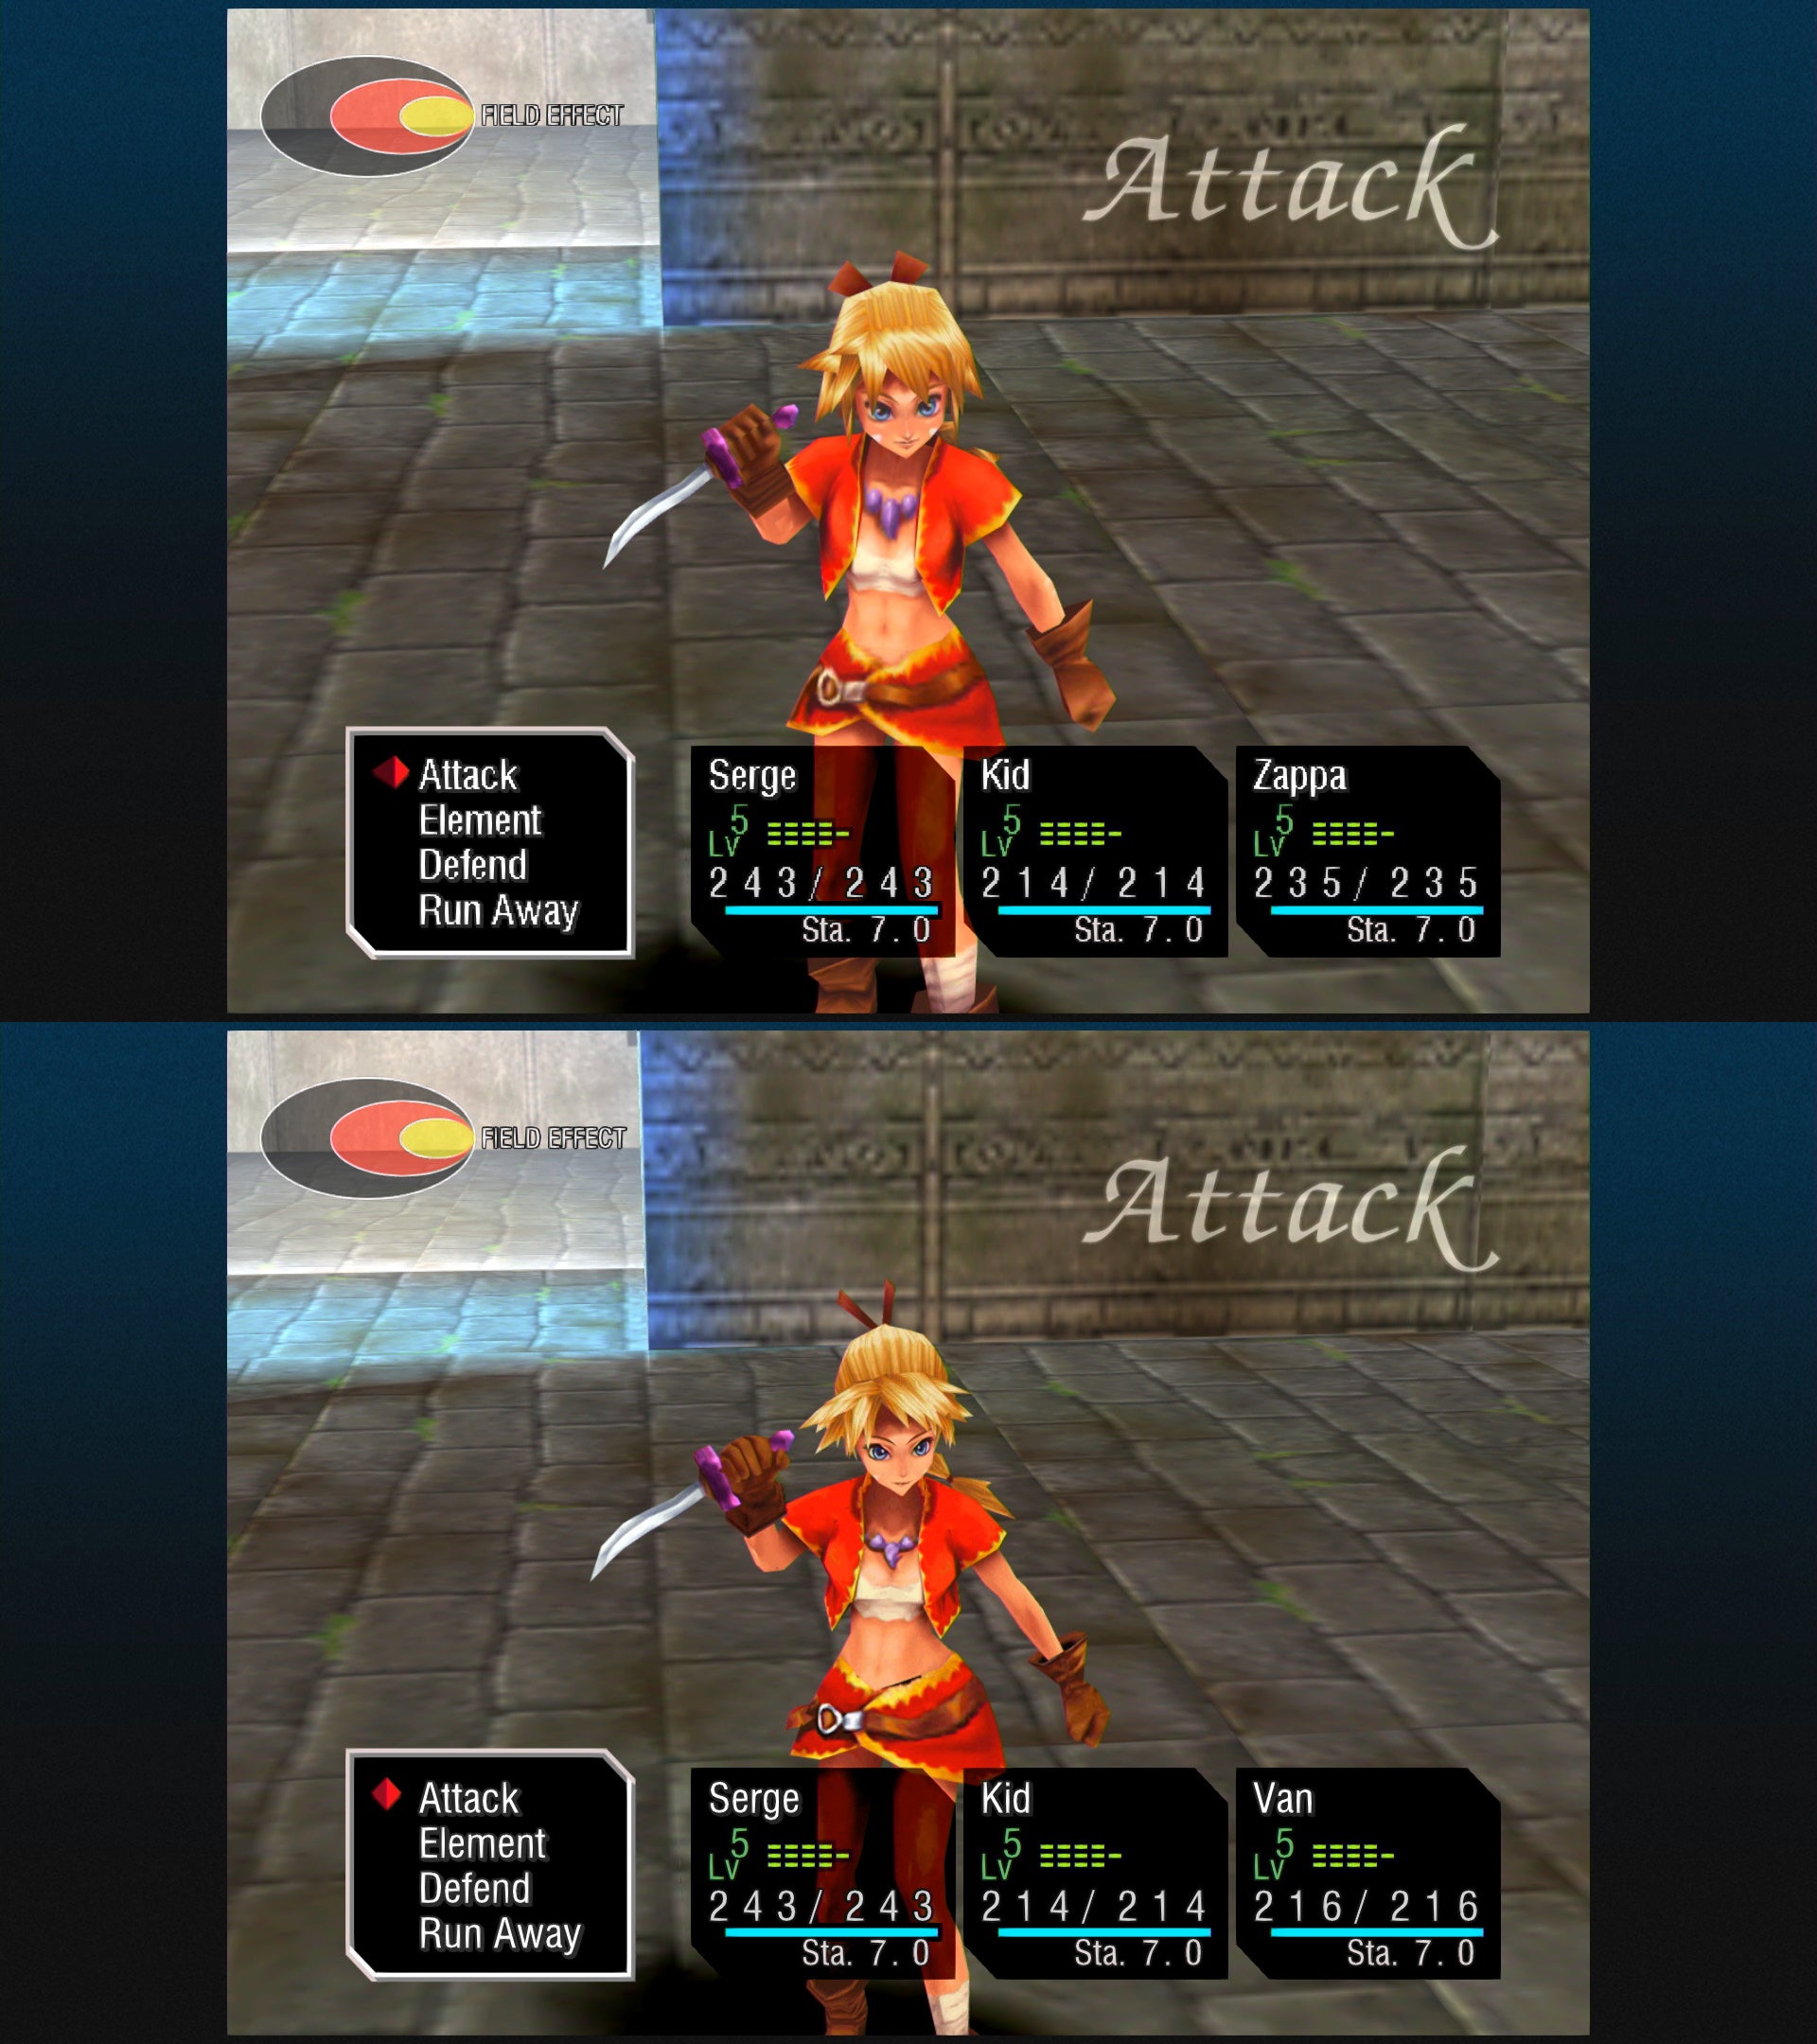 A comparison of original and new looks in Chrono Cross: The Radical Dreamers Edition screenshots.